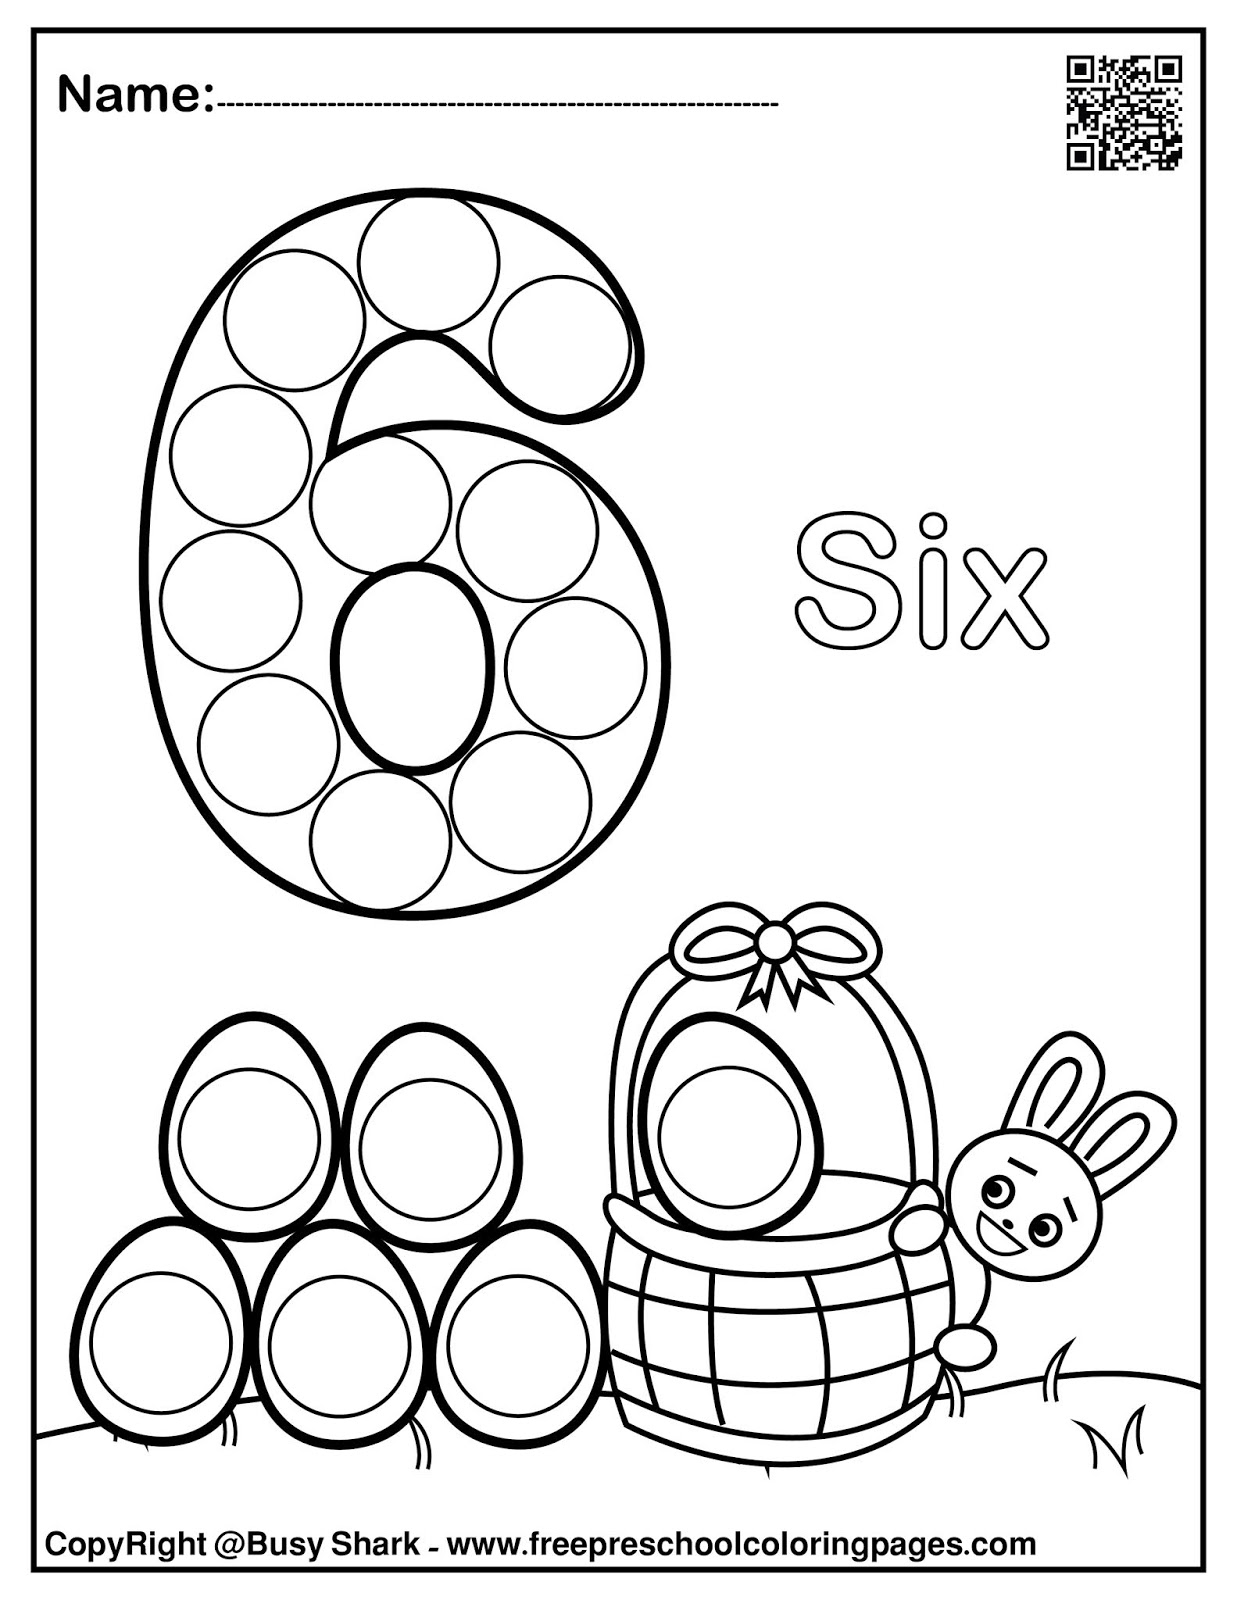 Happy Easter Dot Markers Activity Book Ages 2+: A Fun Dot markers Coloring  Books For Toddlers Do a Dot Coloring Book for Kids Ages 1-3, 2-4, 3-5, Baby  (Paperback)